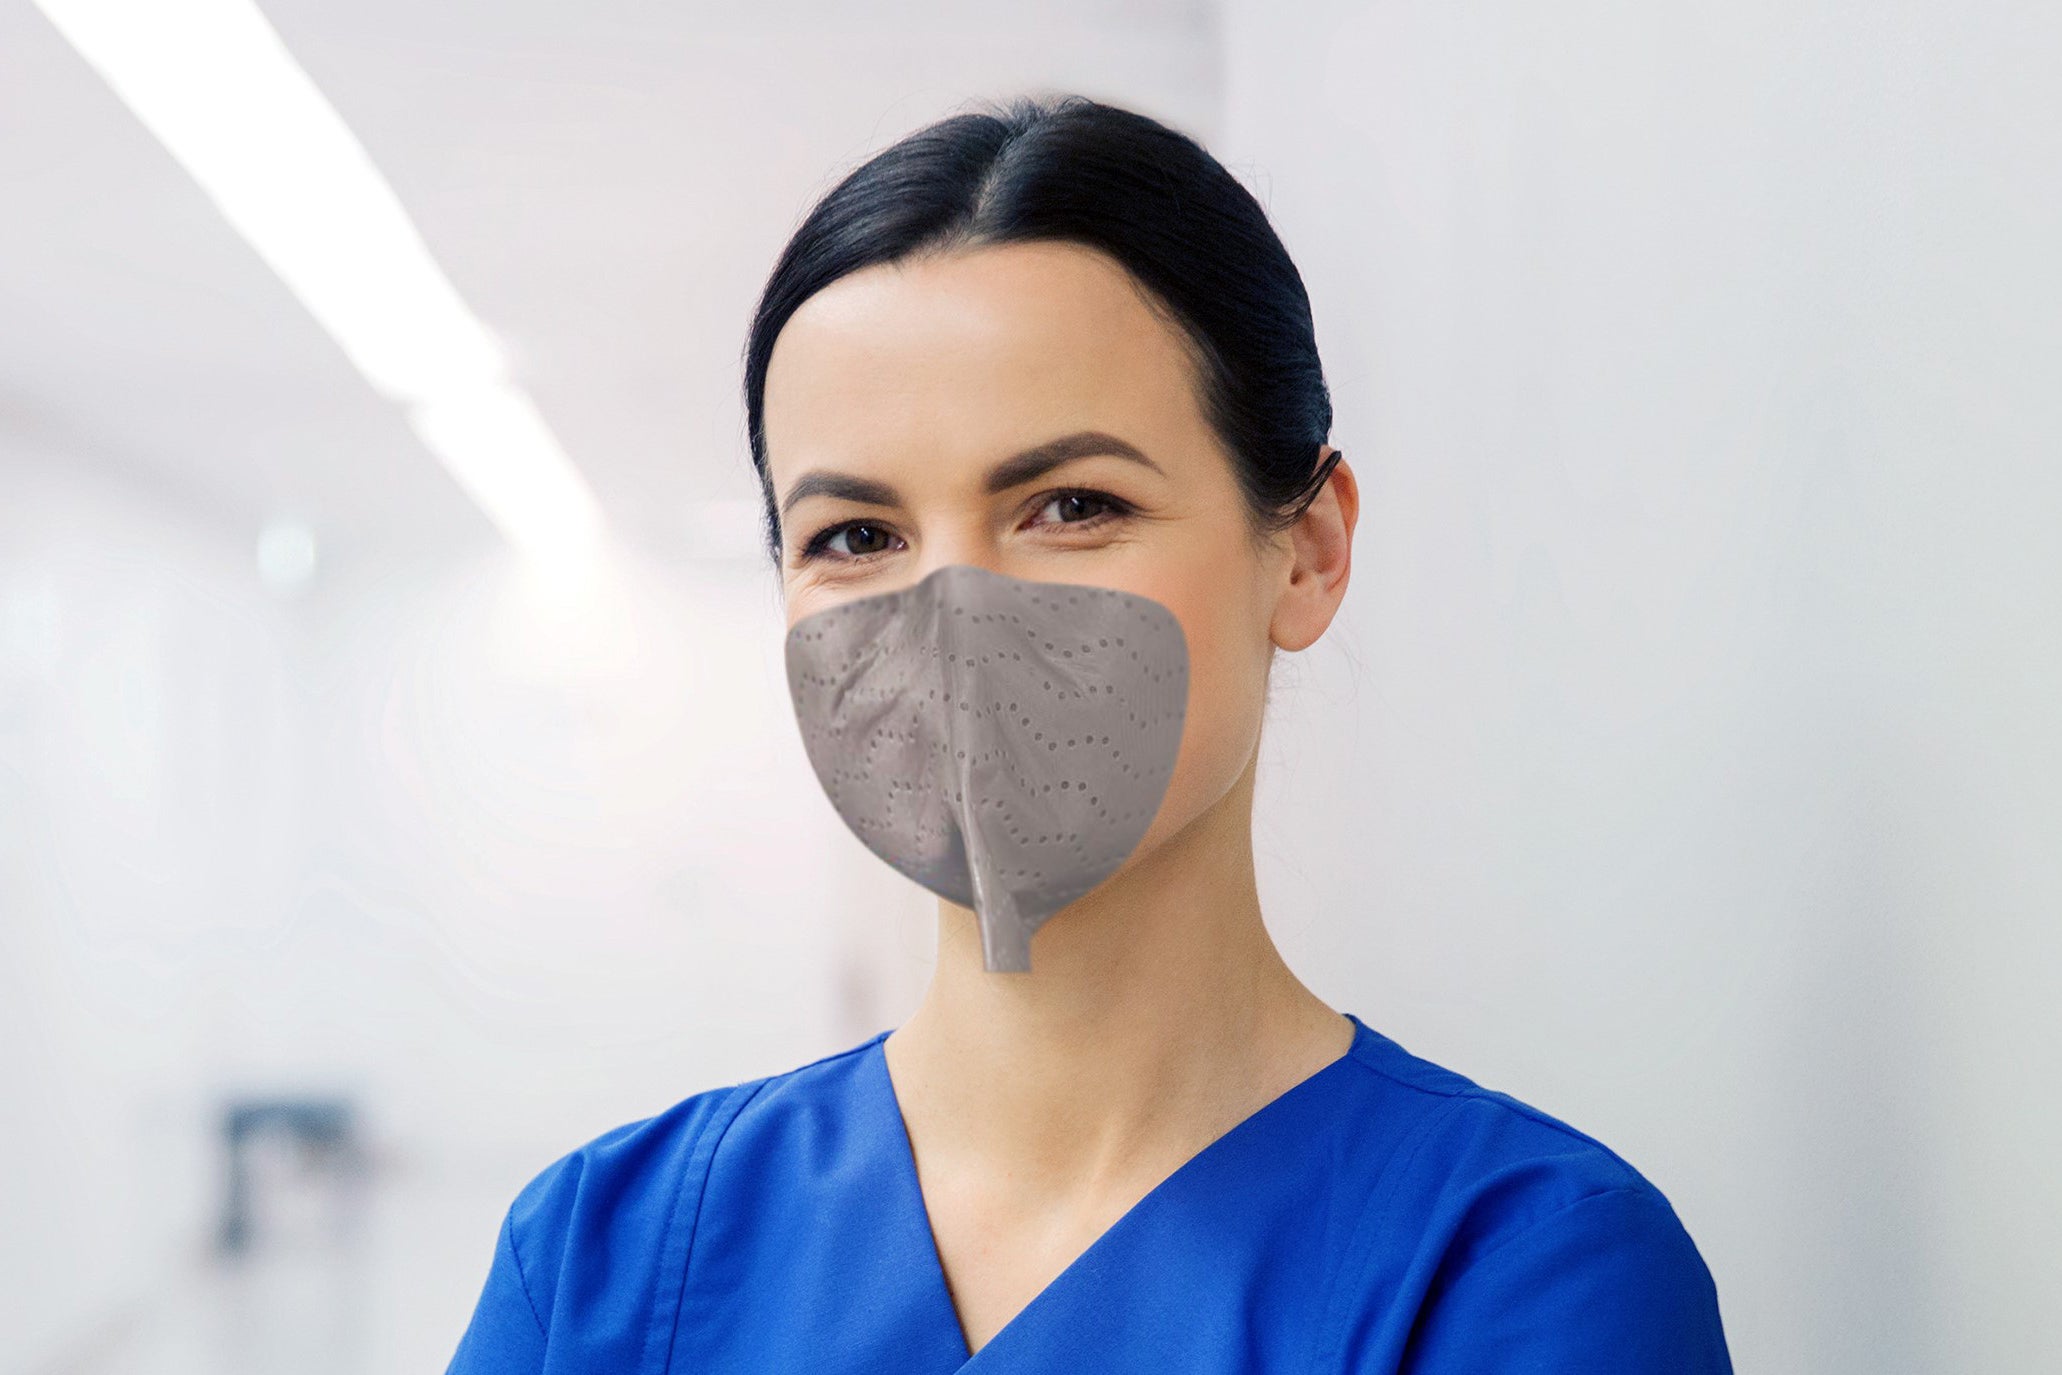 Strap-free ReadiMask adheres directly to the wearer’s skin.